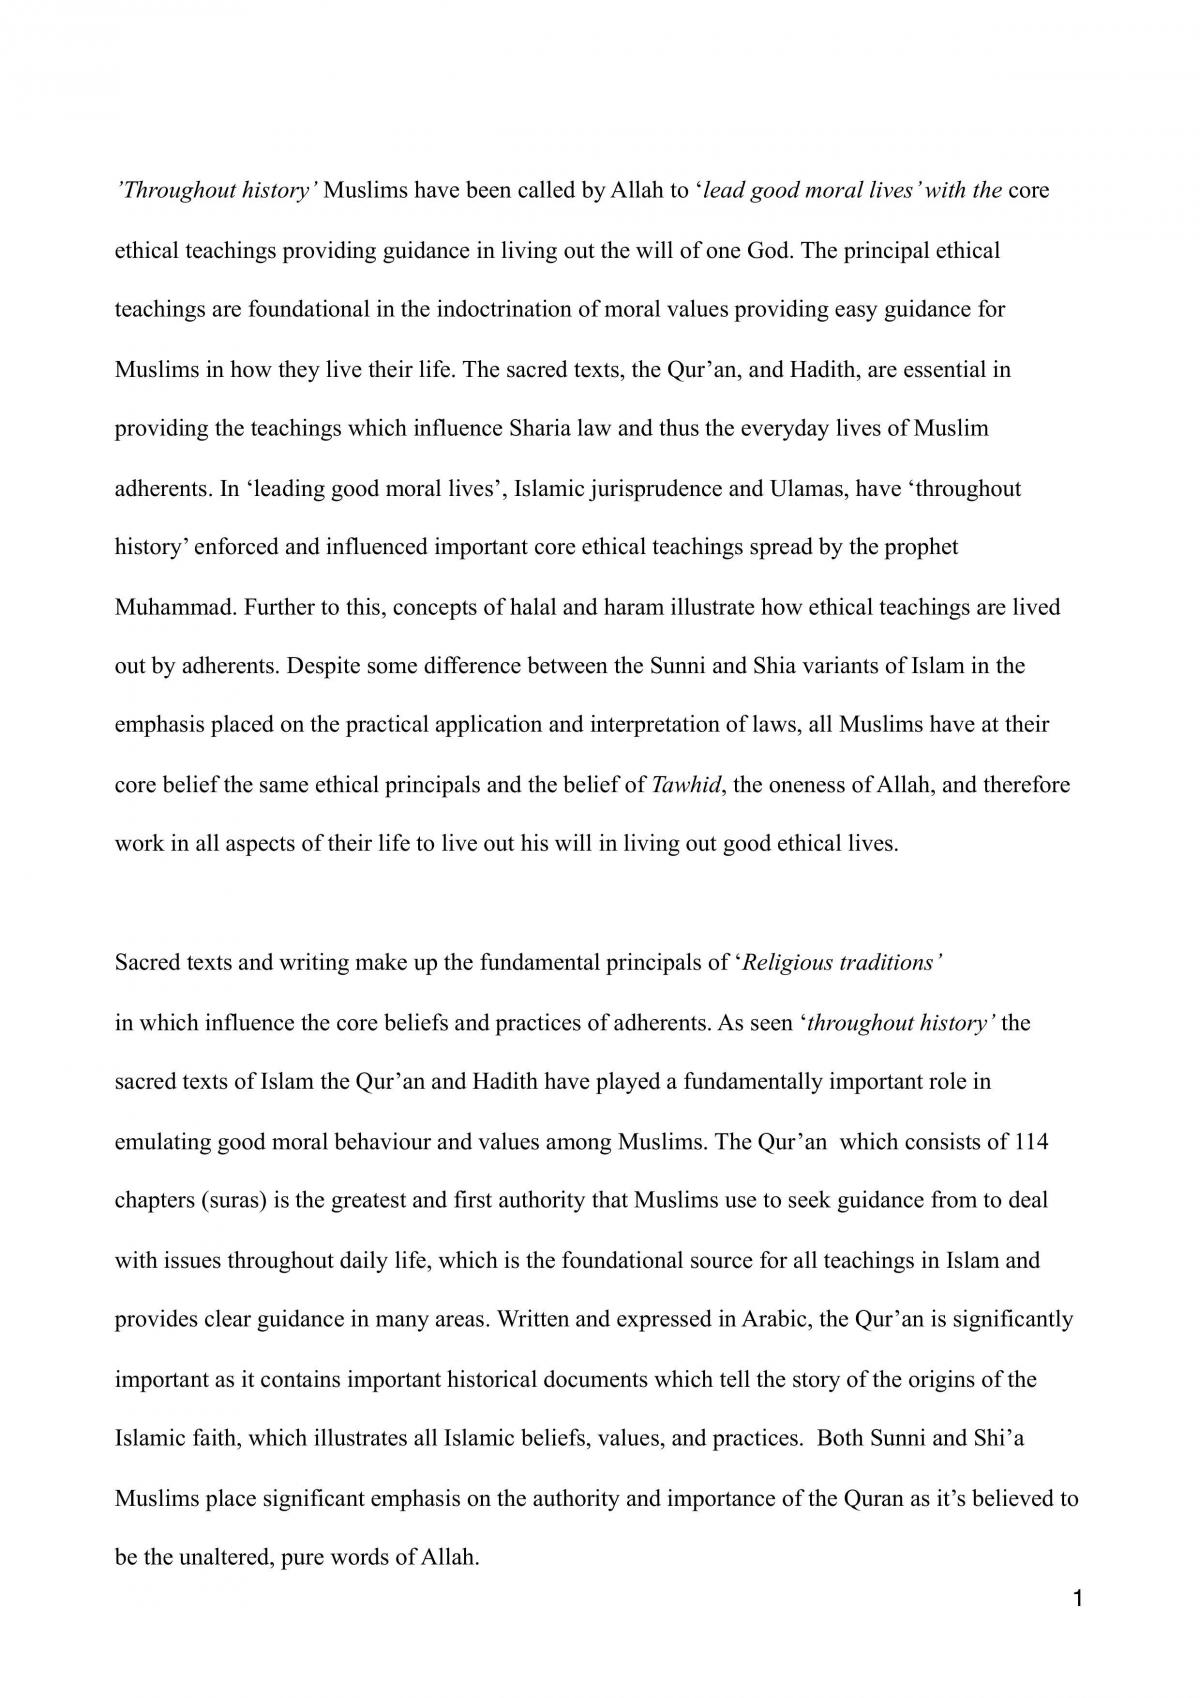 college essay about islam